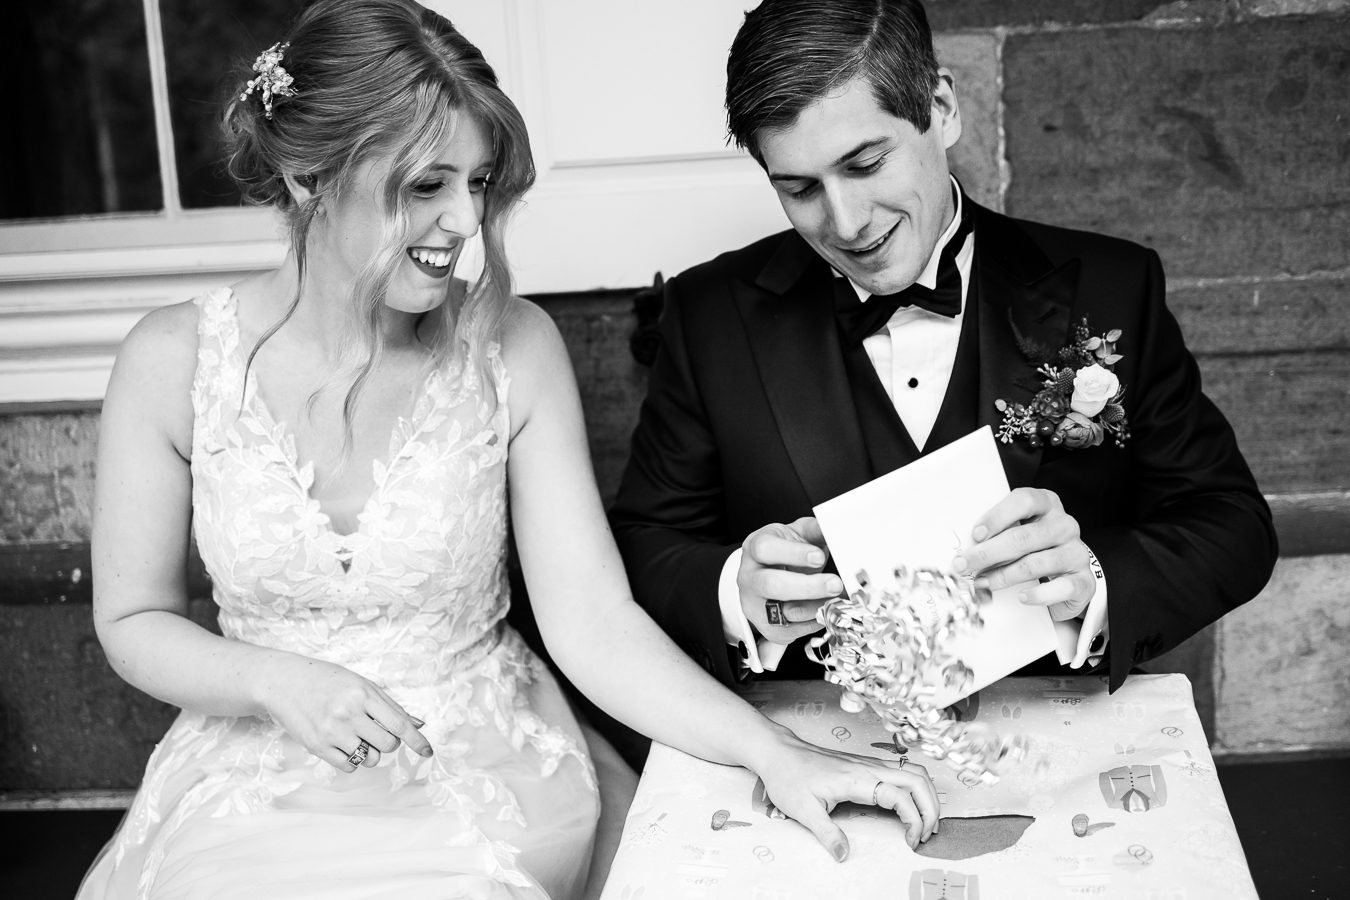 candid black and white moment of the bride and groom as they open gifts together during their wedding reception at the Elizabeth furnace in lititz pa 